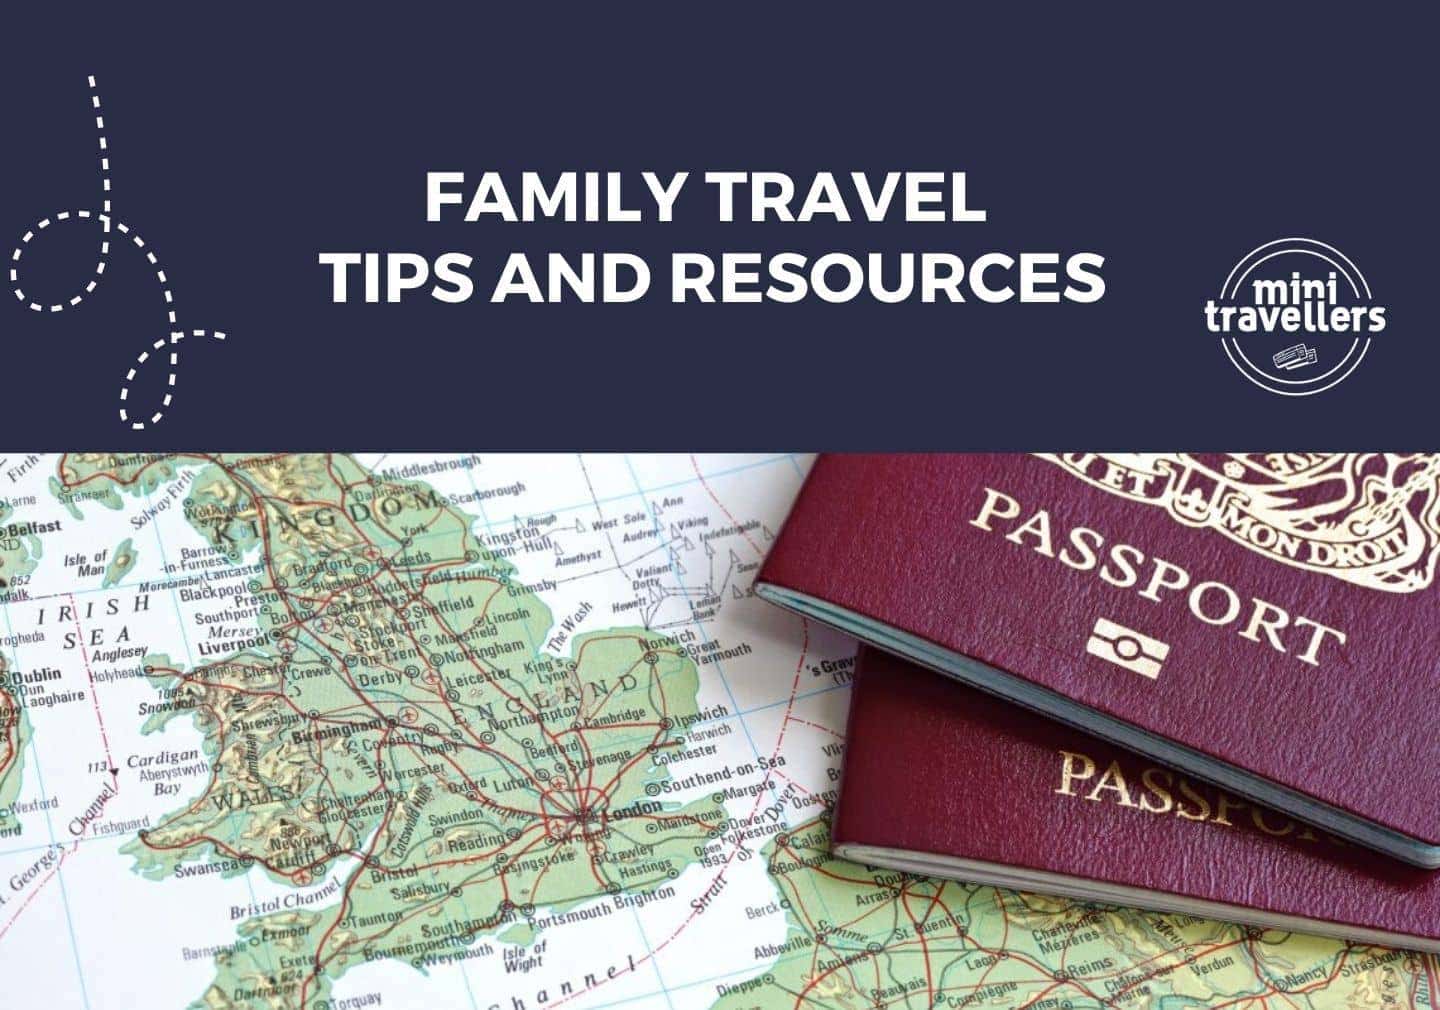 https://minitravellers.co.uk/family-travel-tips-and-resources/